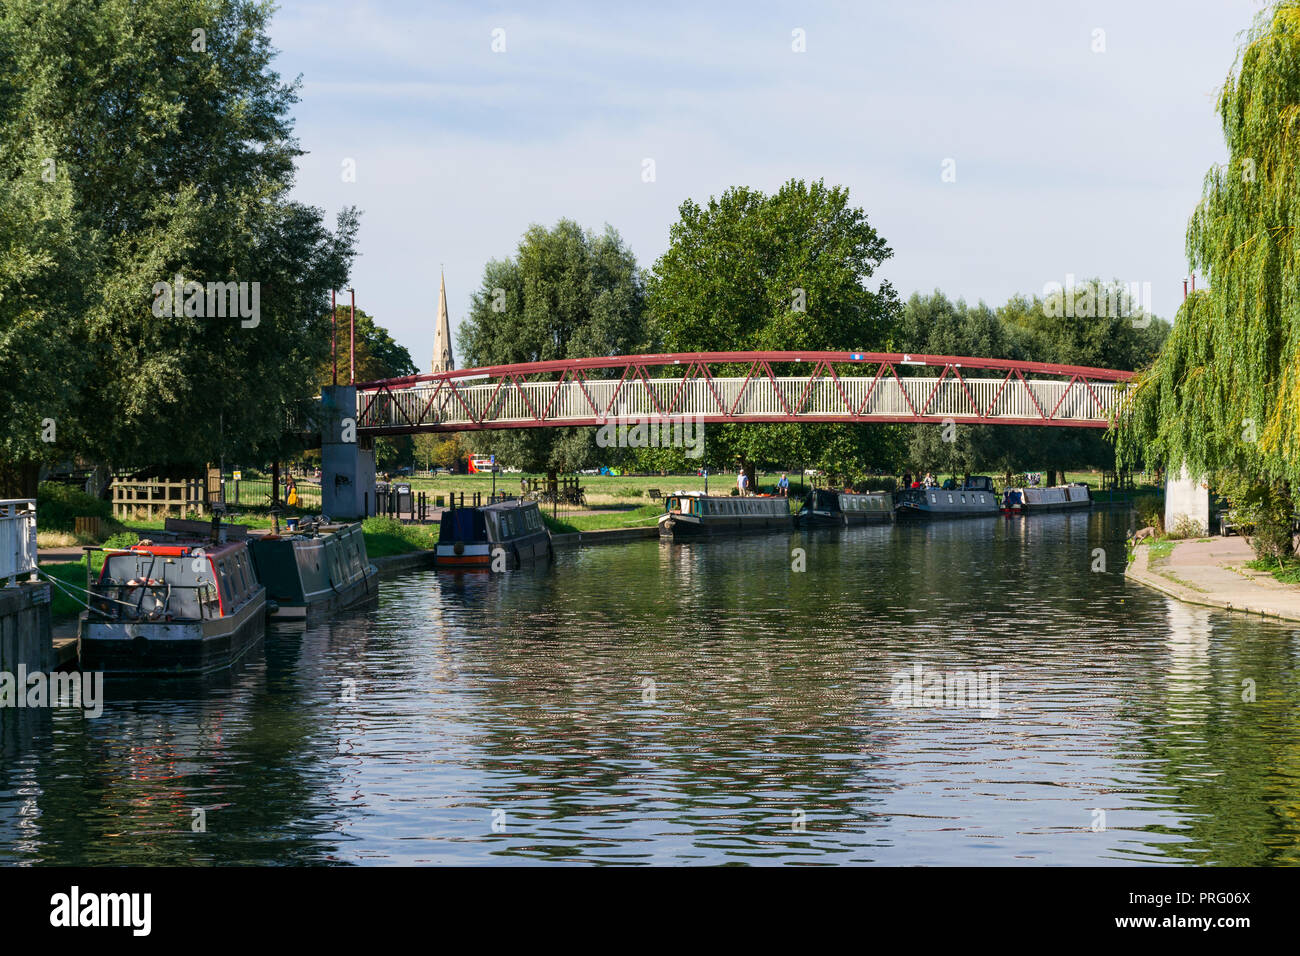 View of the river Cam and moored narrowboats with footbridge by Midsummer Common, Cambridge, UK Stock Photo